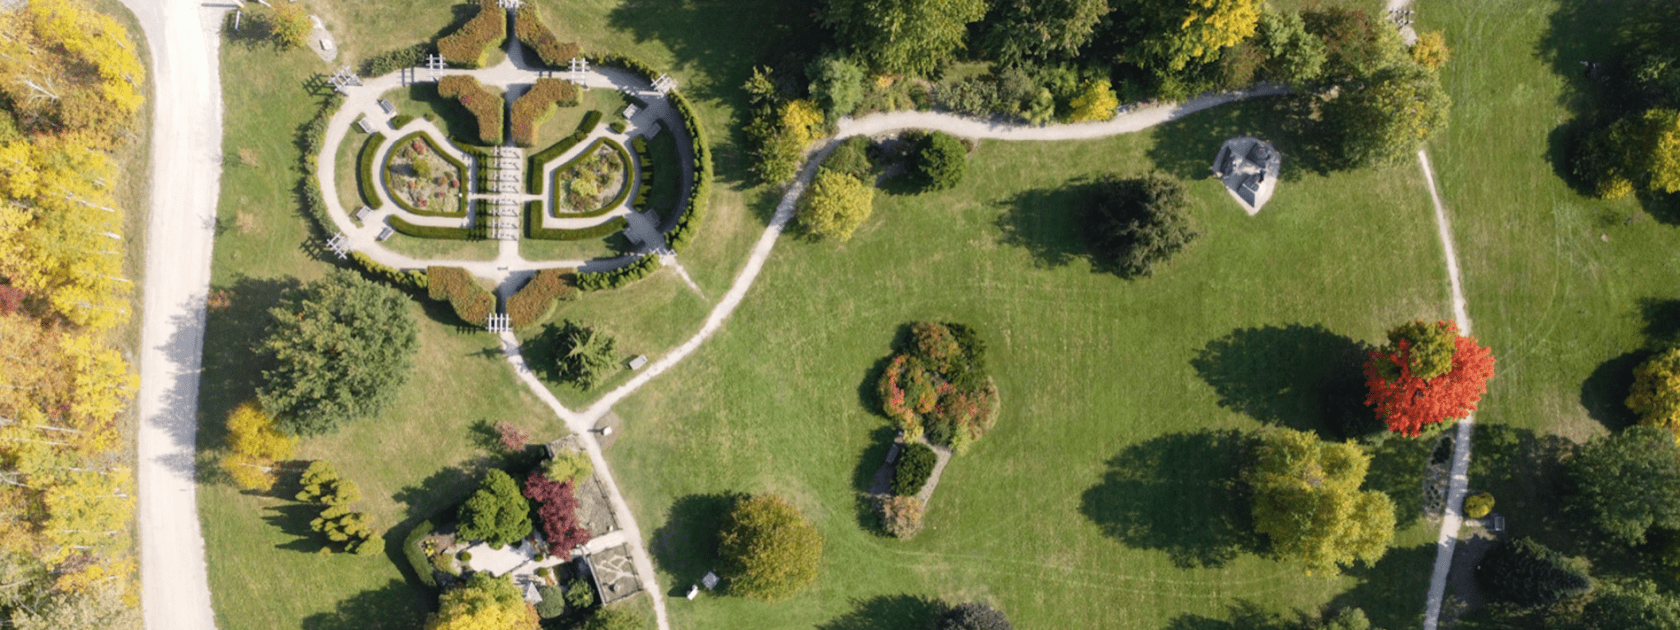 An aerial view looking at pathways and gardens in The Arboretum. The English Garden can be seen as it forms an oval surrounded by shrubs. A road follows the left side of the image.